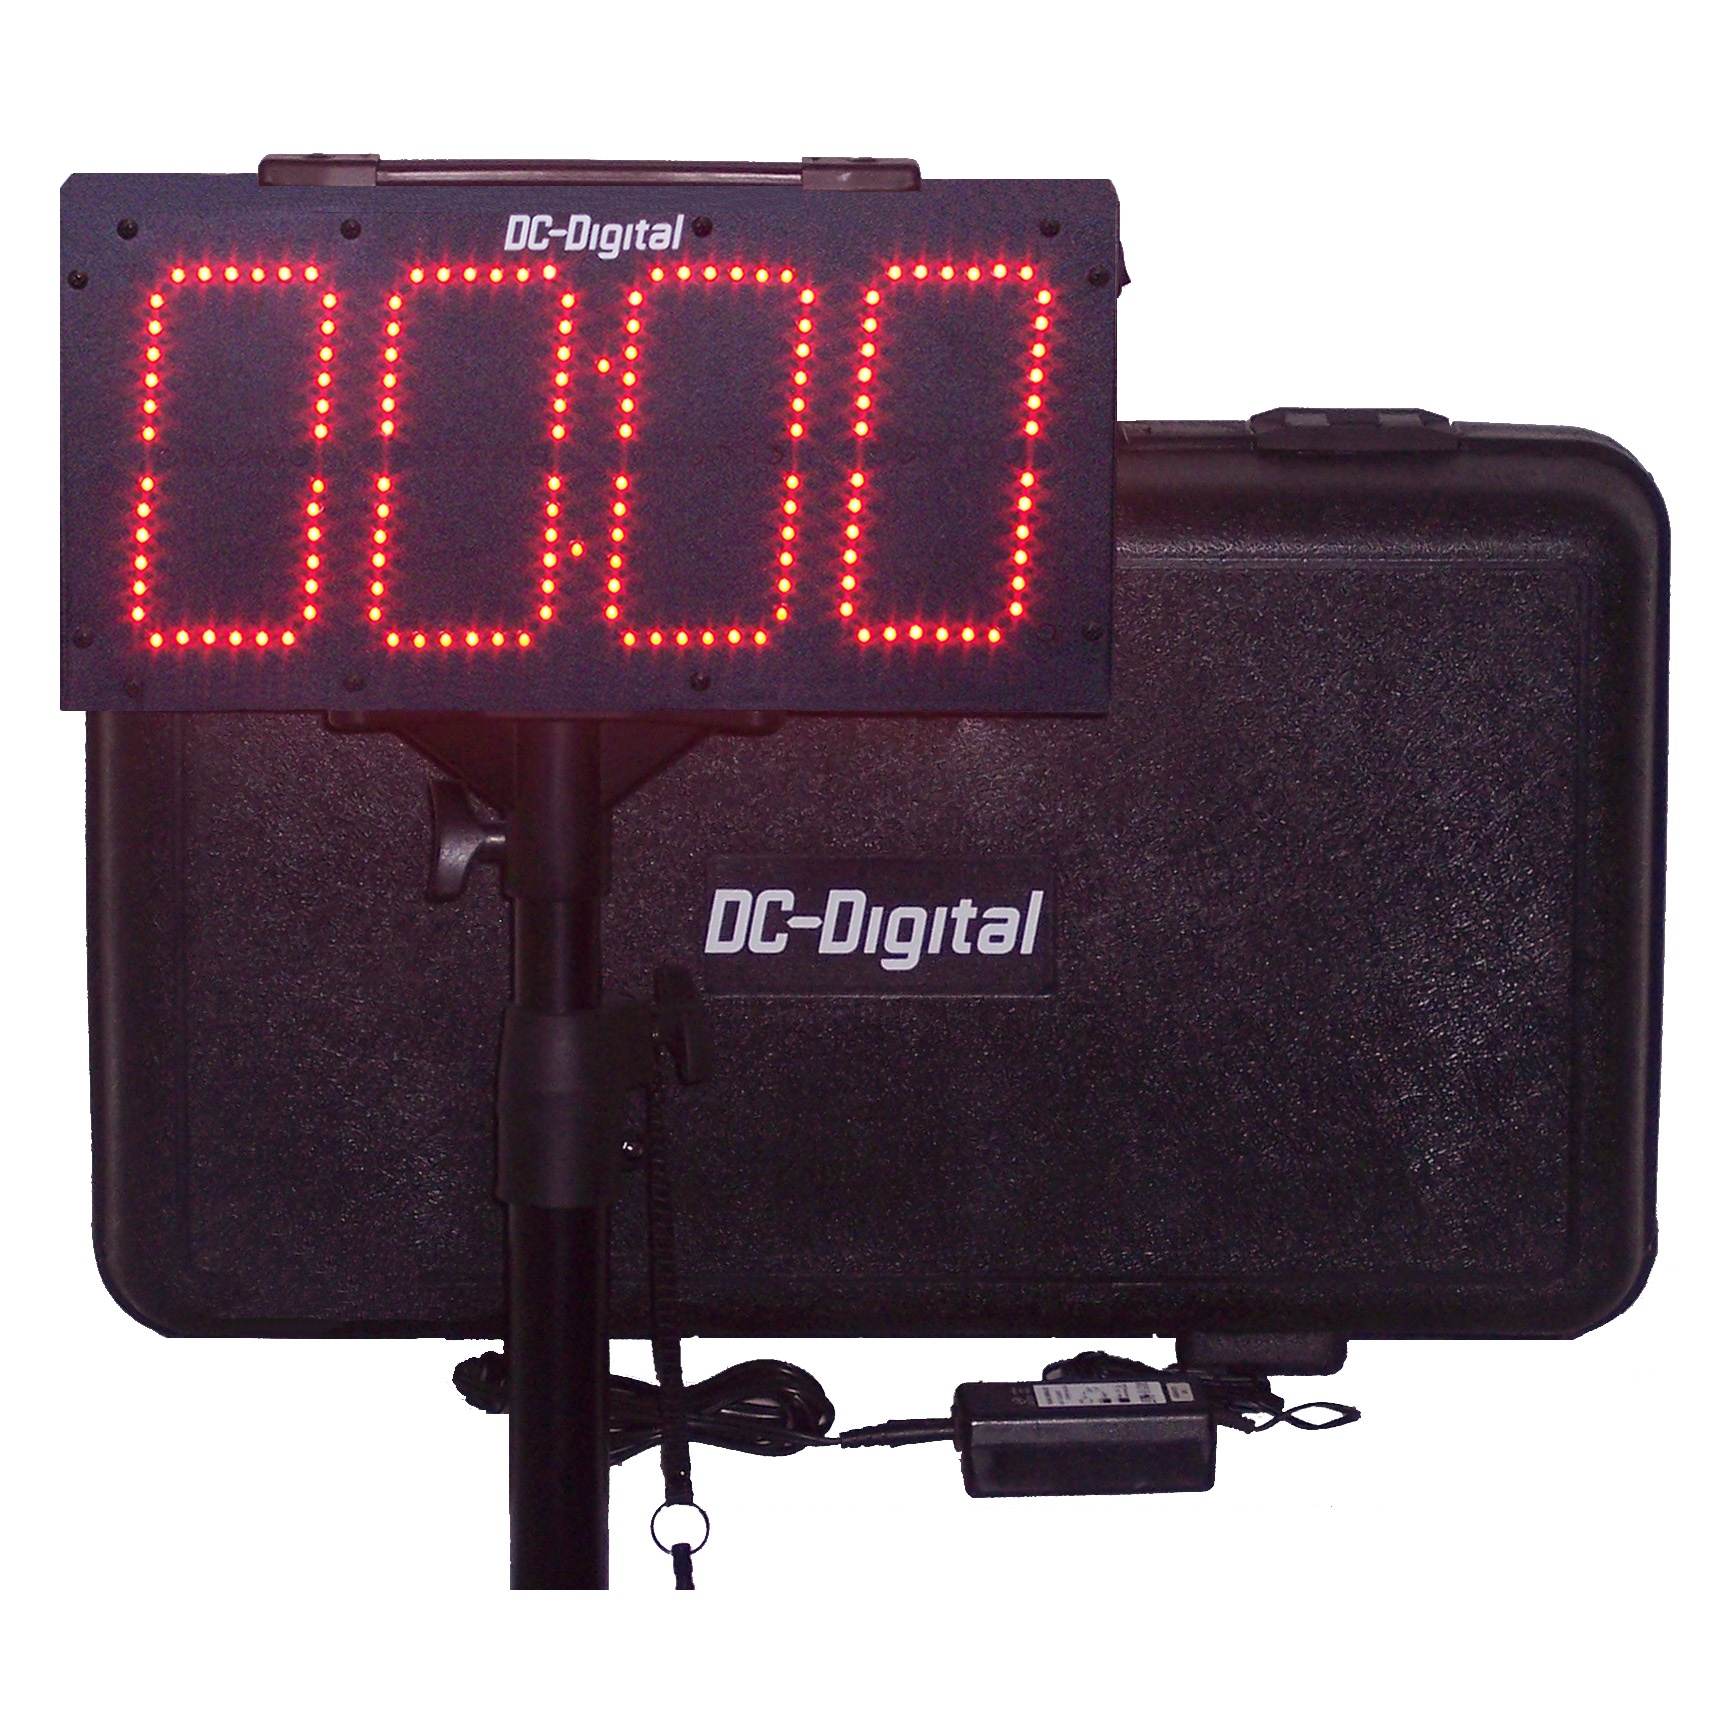 (DC-60UT-BTC) Portable 6.0 Inch LED Digit, Multi-Function, Multipurpose Sport (Counts Up, Counts Down and Time of Day Clock), Battery Operated, Digital Timer-Clock, Environmentally Sealed Push-Button Controlled , Carrying handle, Carrying Case, Tripod with Mount and Battery Charger (INDOOR/OUTDOOR)